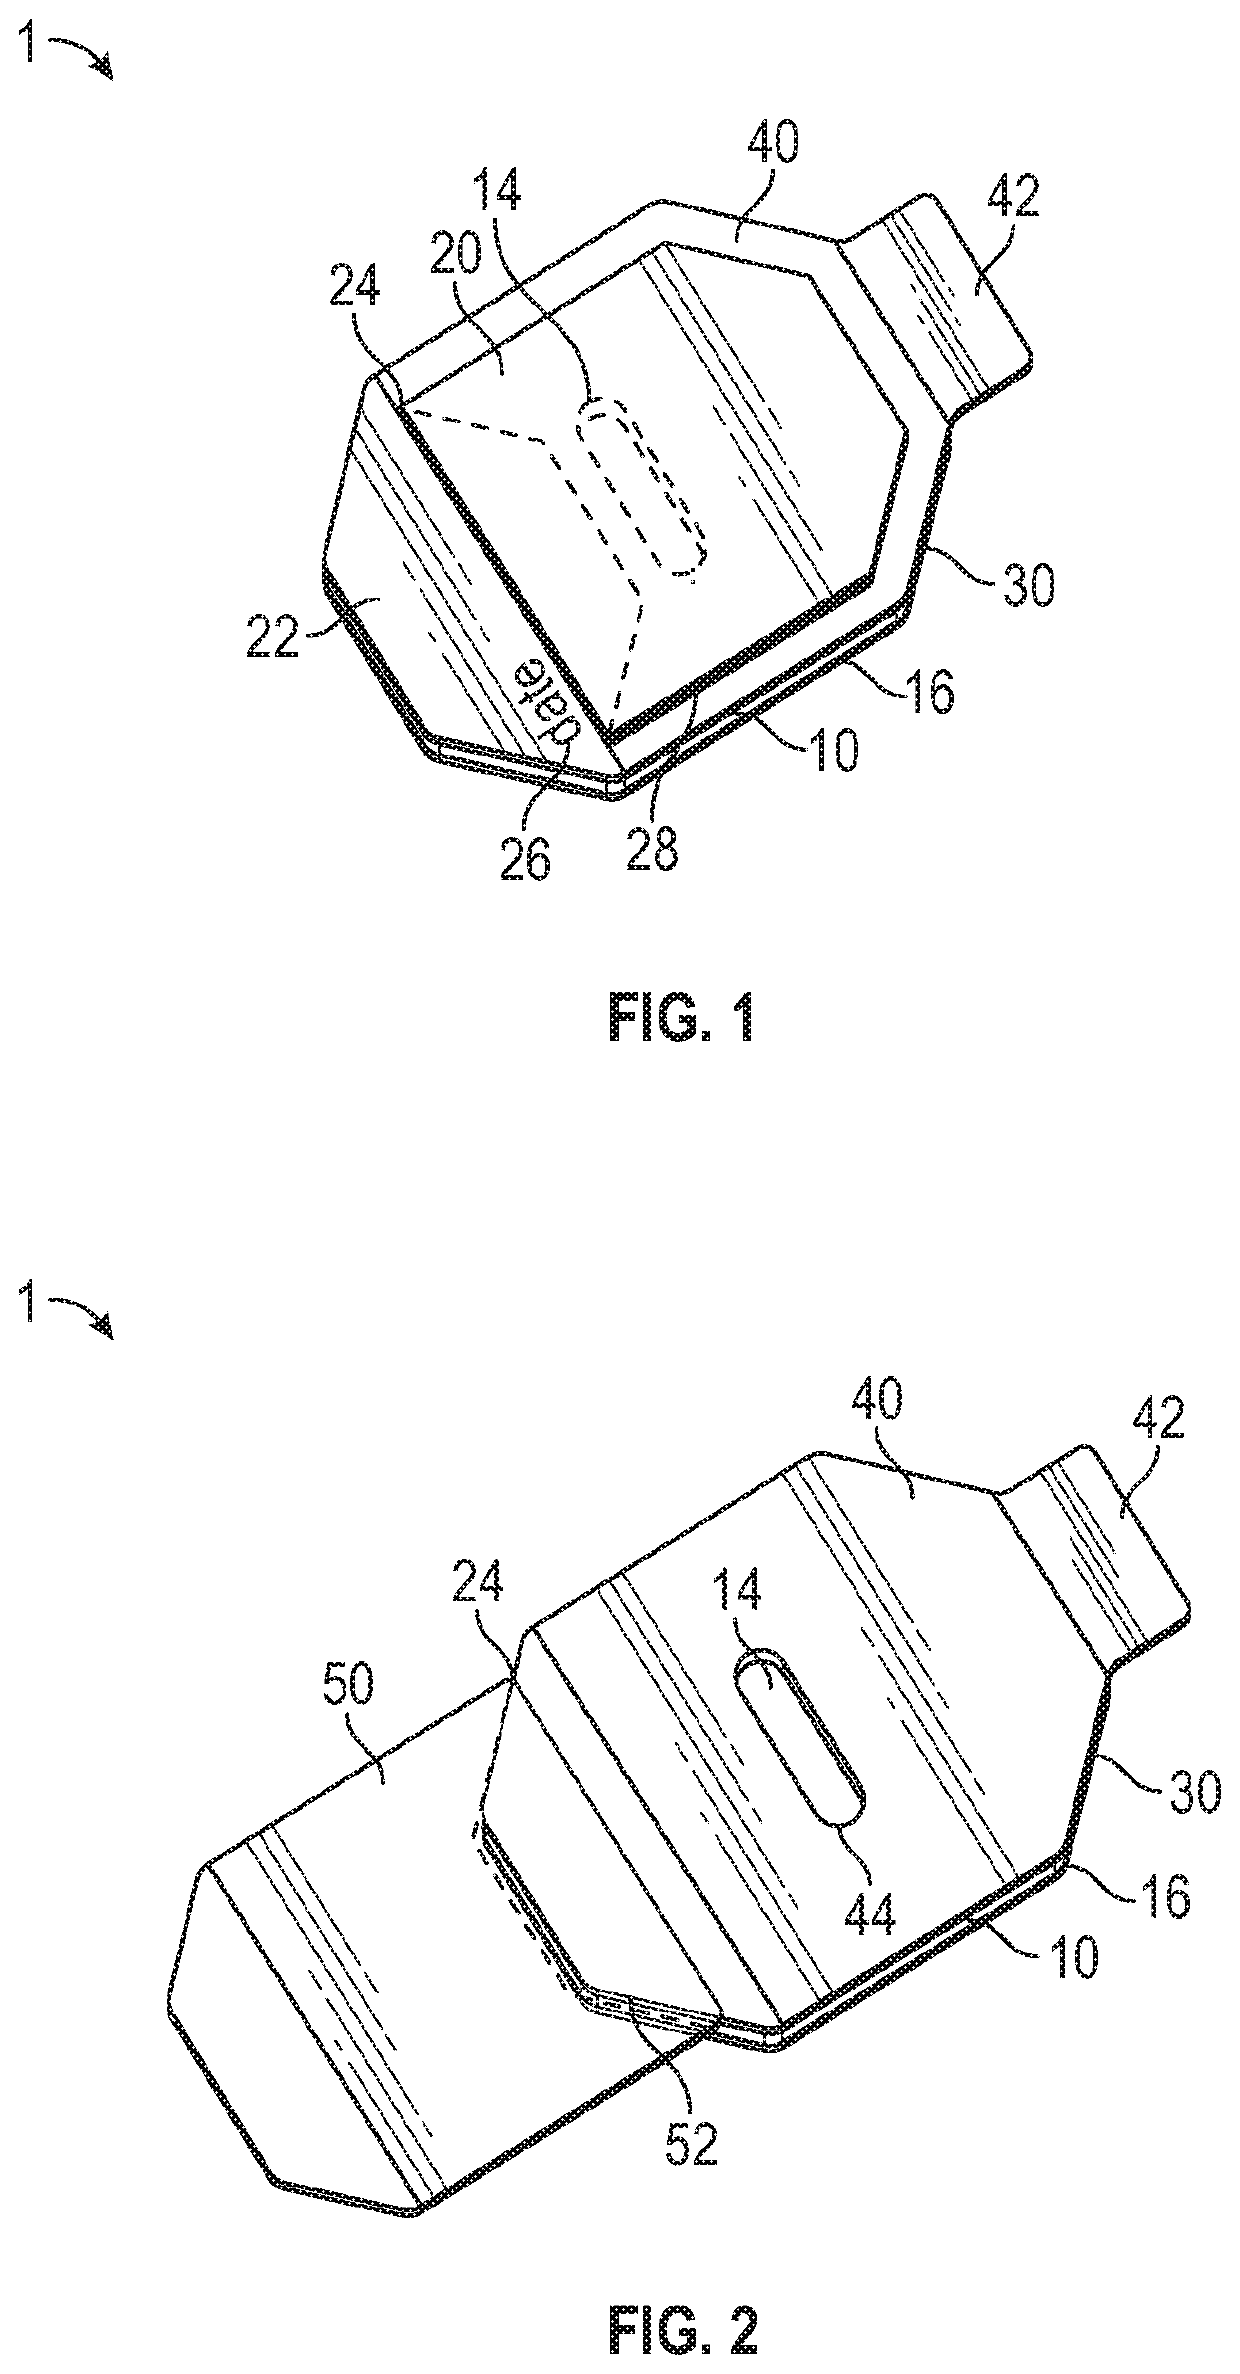 Securement dressing for vascular access device with skin adhesive application window